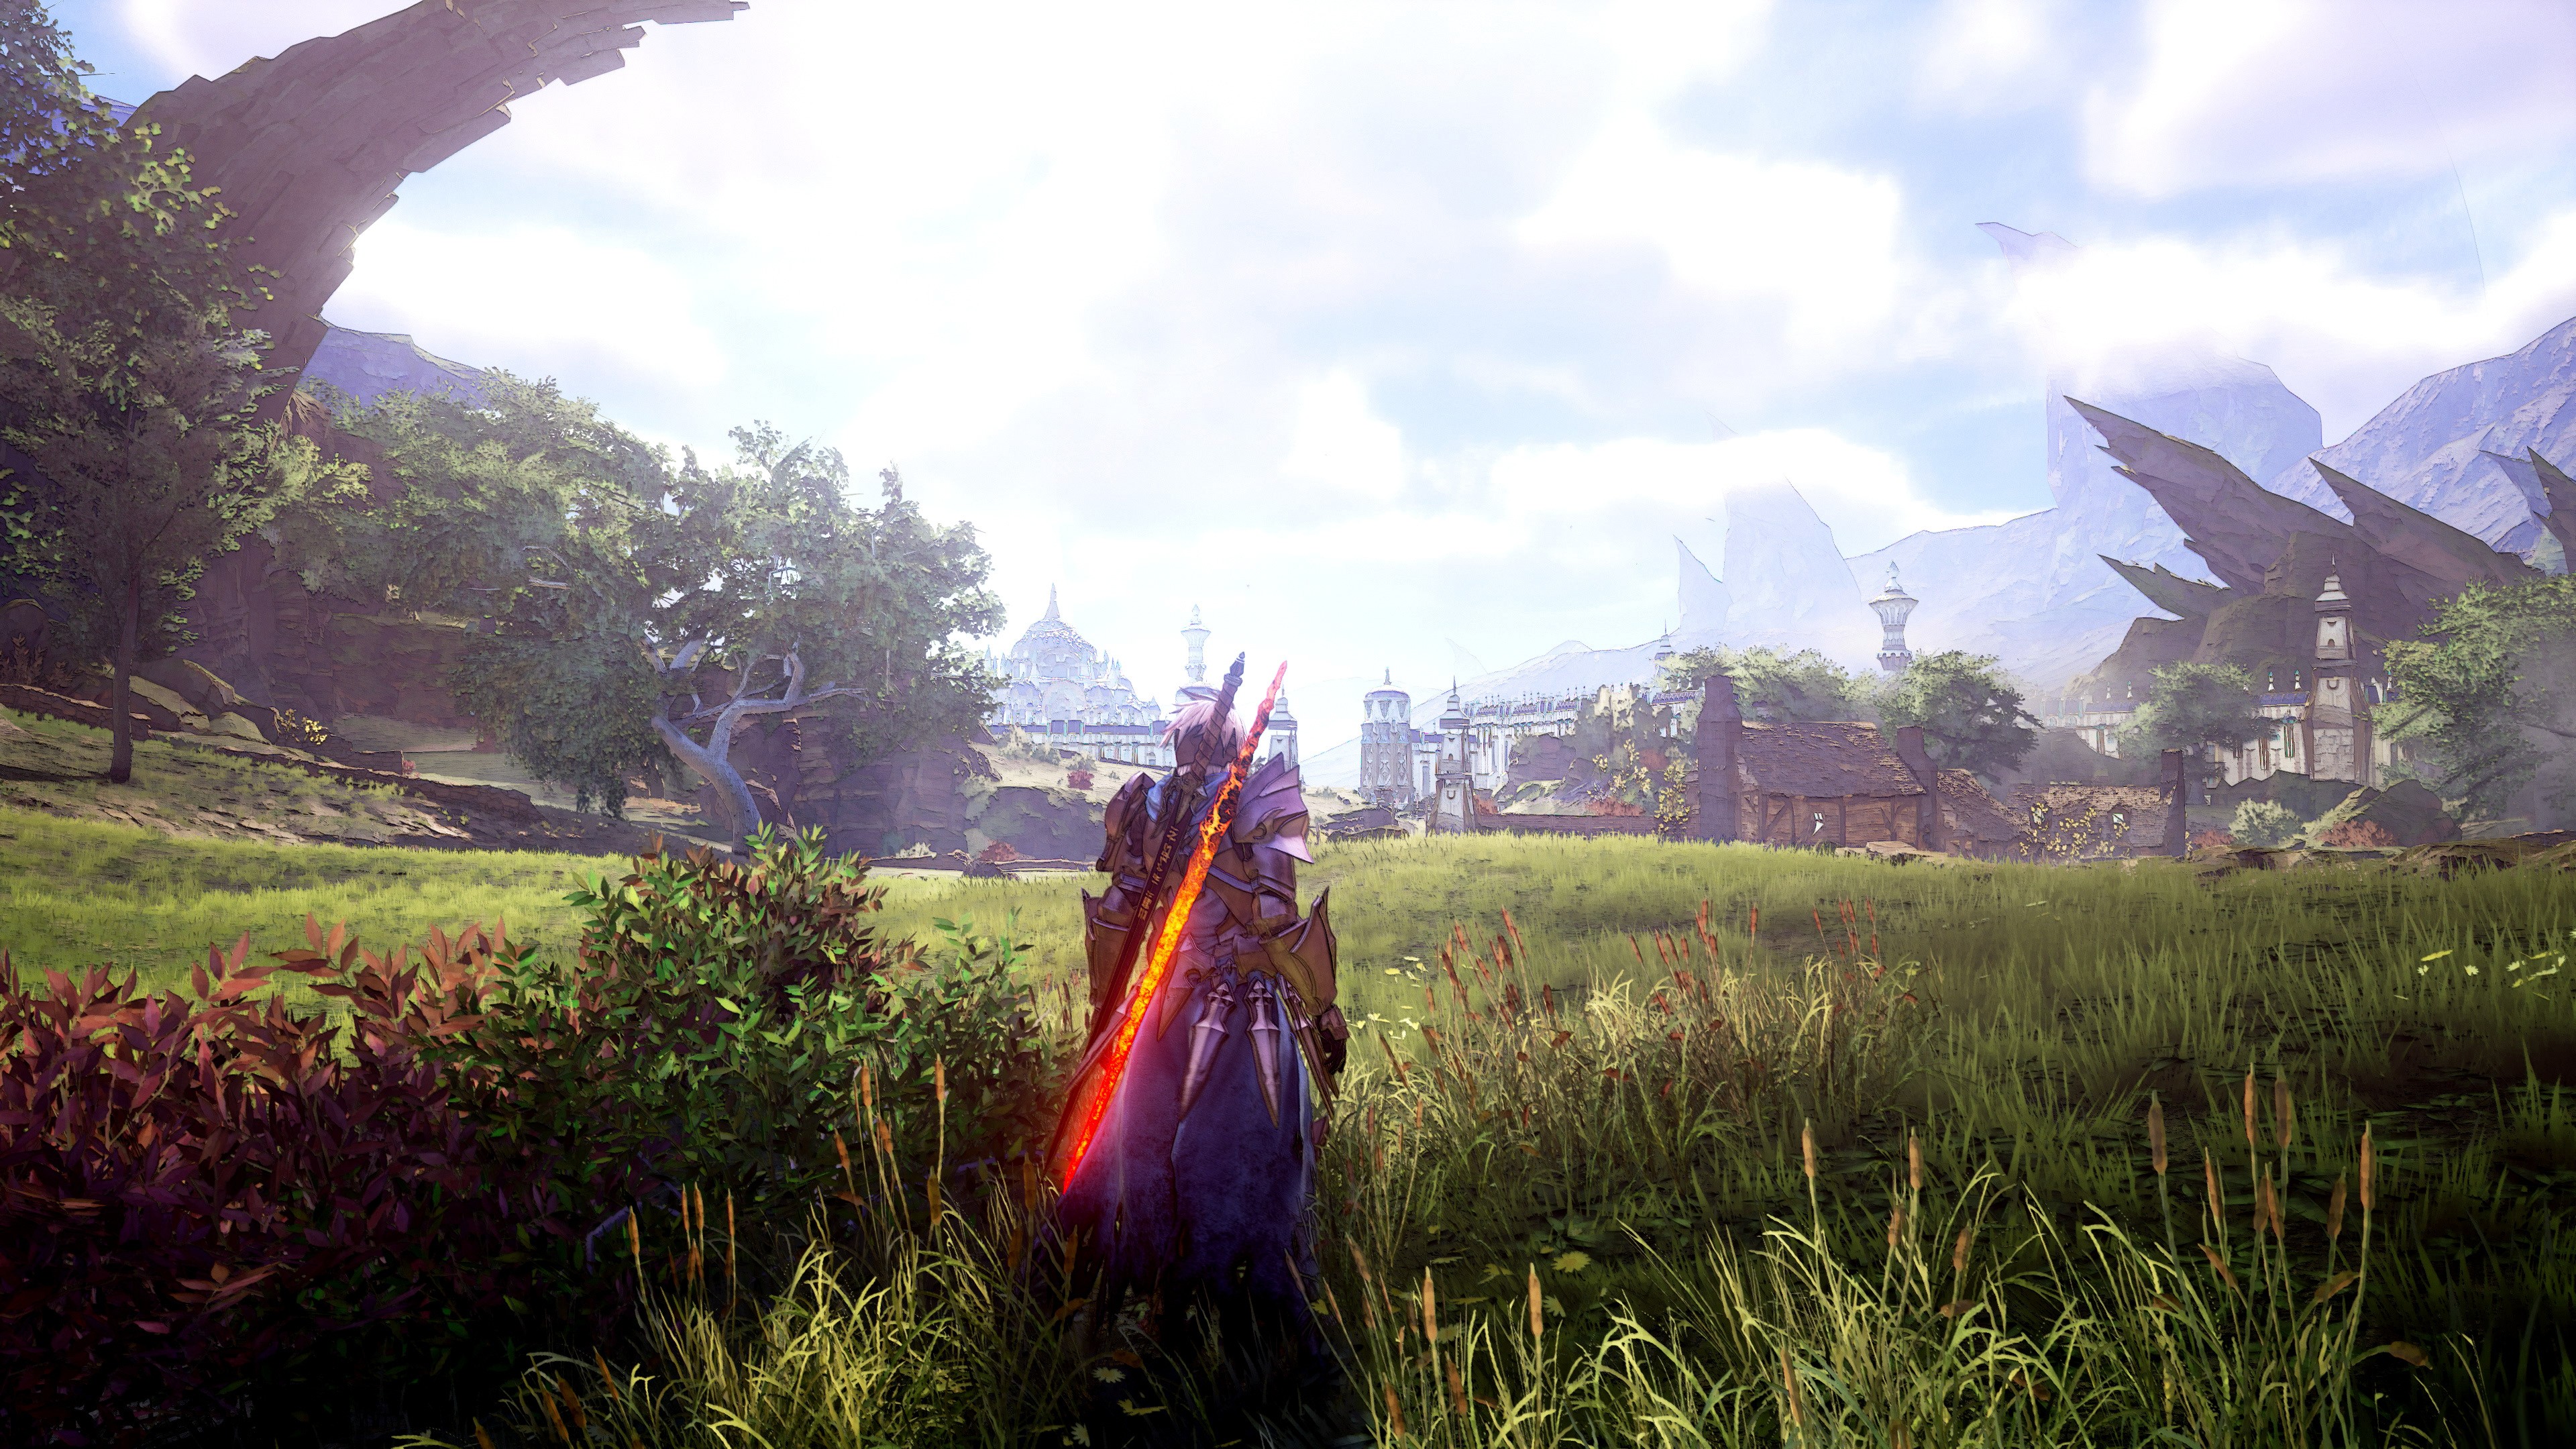 video game, tales of arise